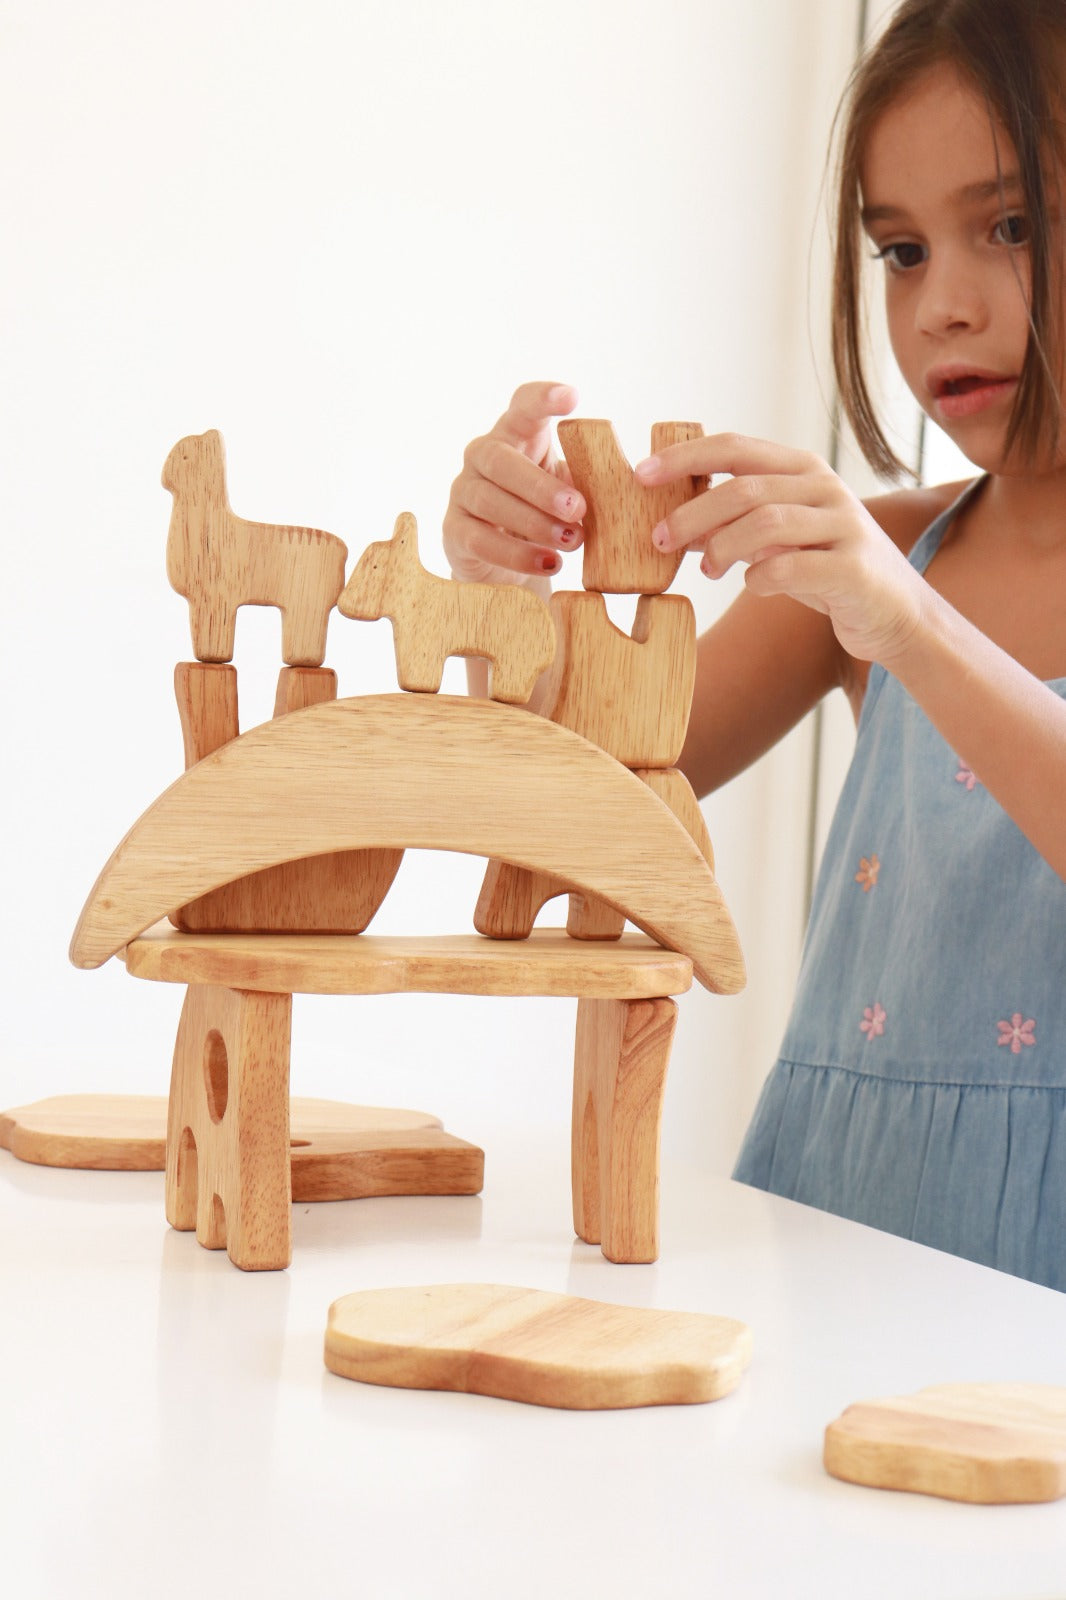 Why Educators are Choosing Wooden Toys for STEM Learning